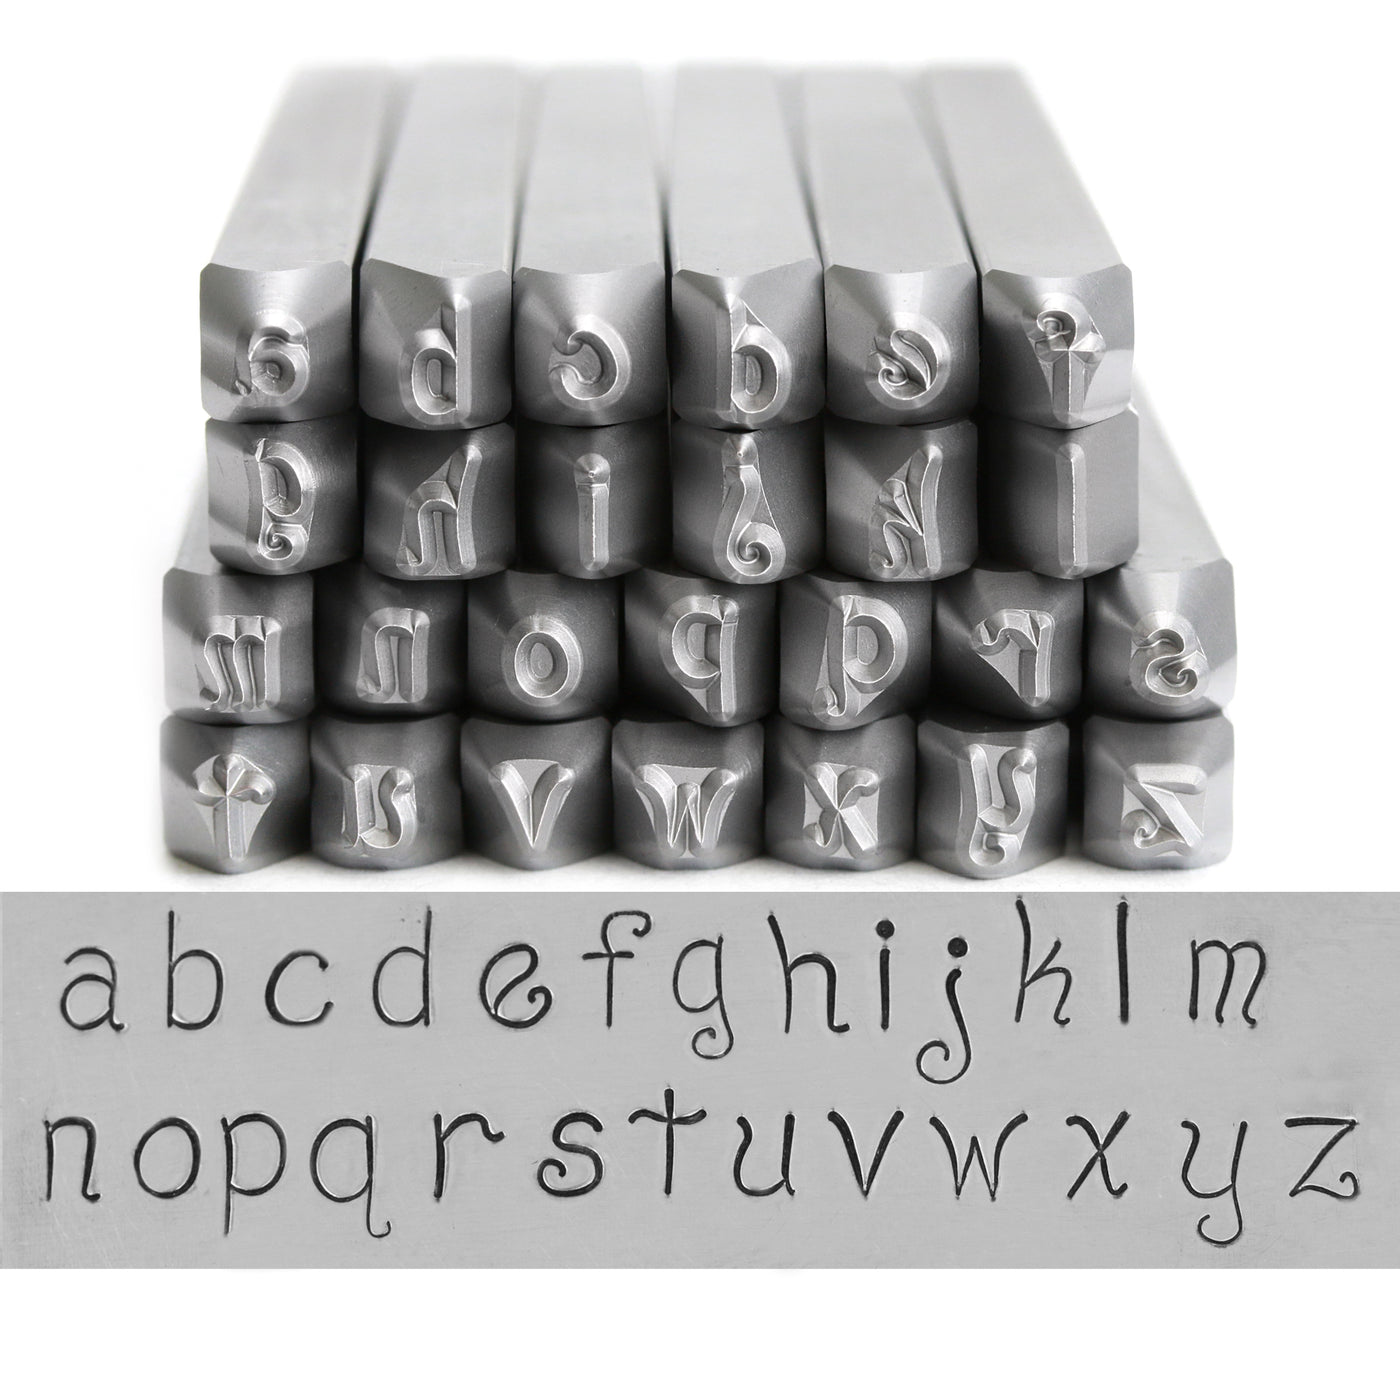 Beaducation Wackadoodle Lowercase Letter Stamp Set 1/8 (3.2mm)